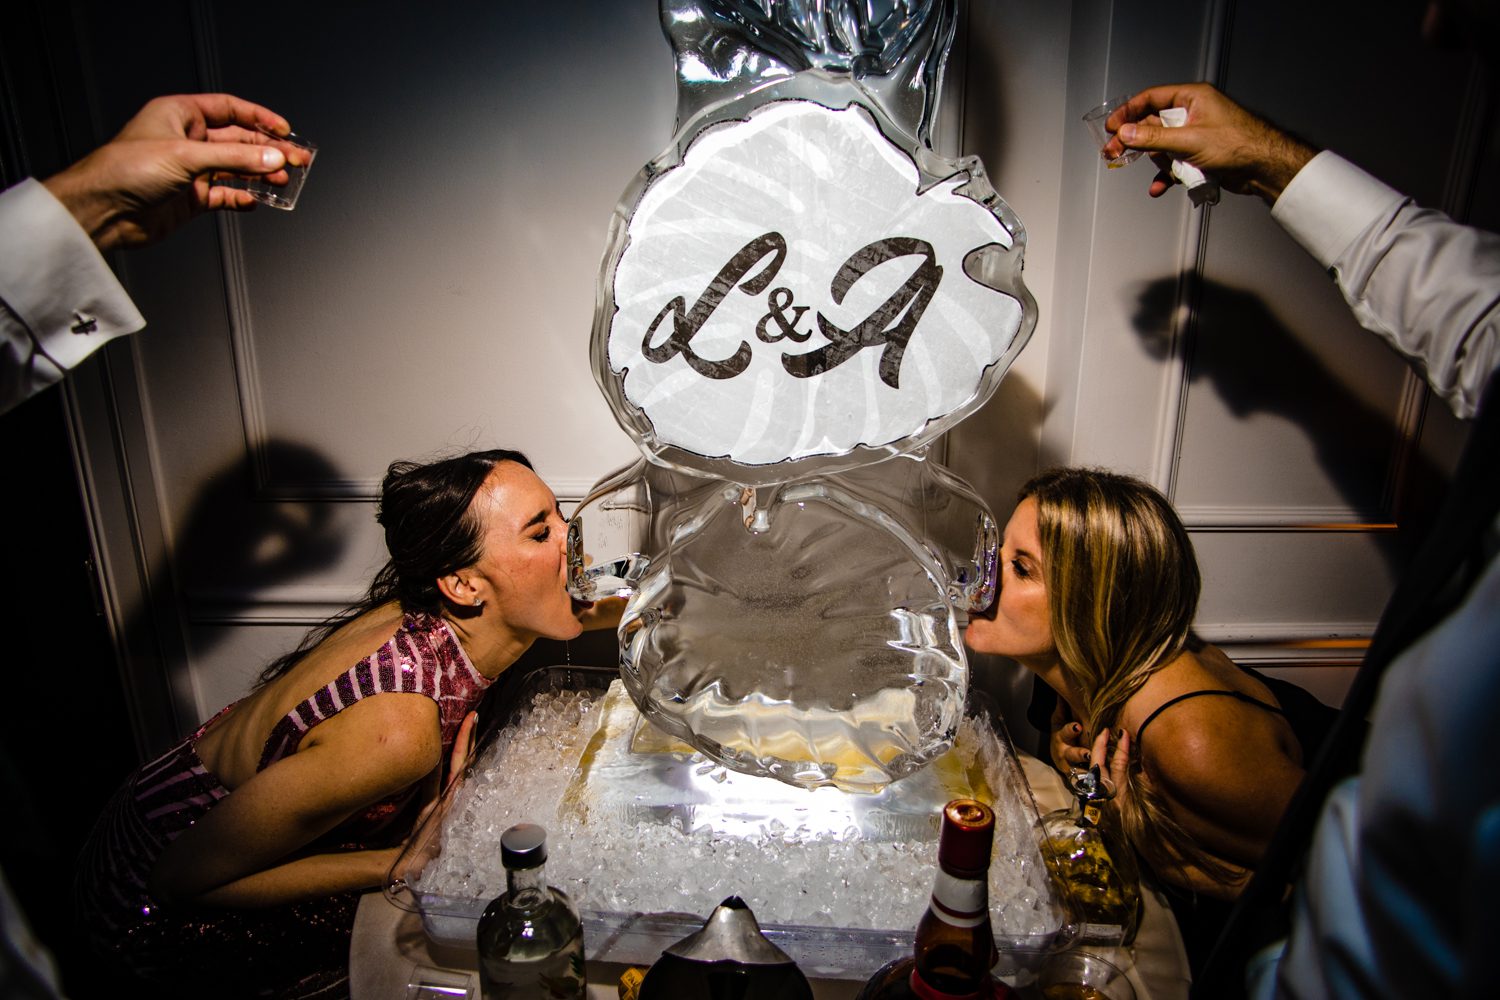 A group of people kissing in front of an ice sculpture at a Jewish wedding in Miami, FL.